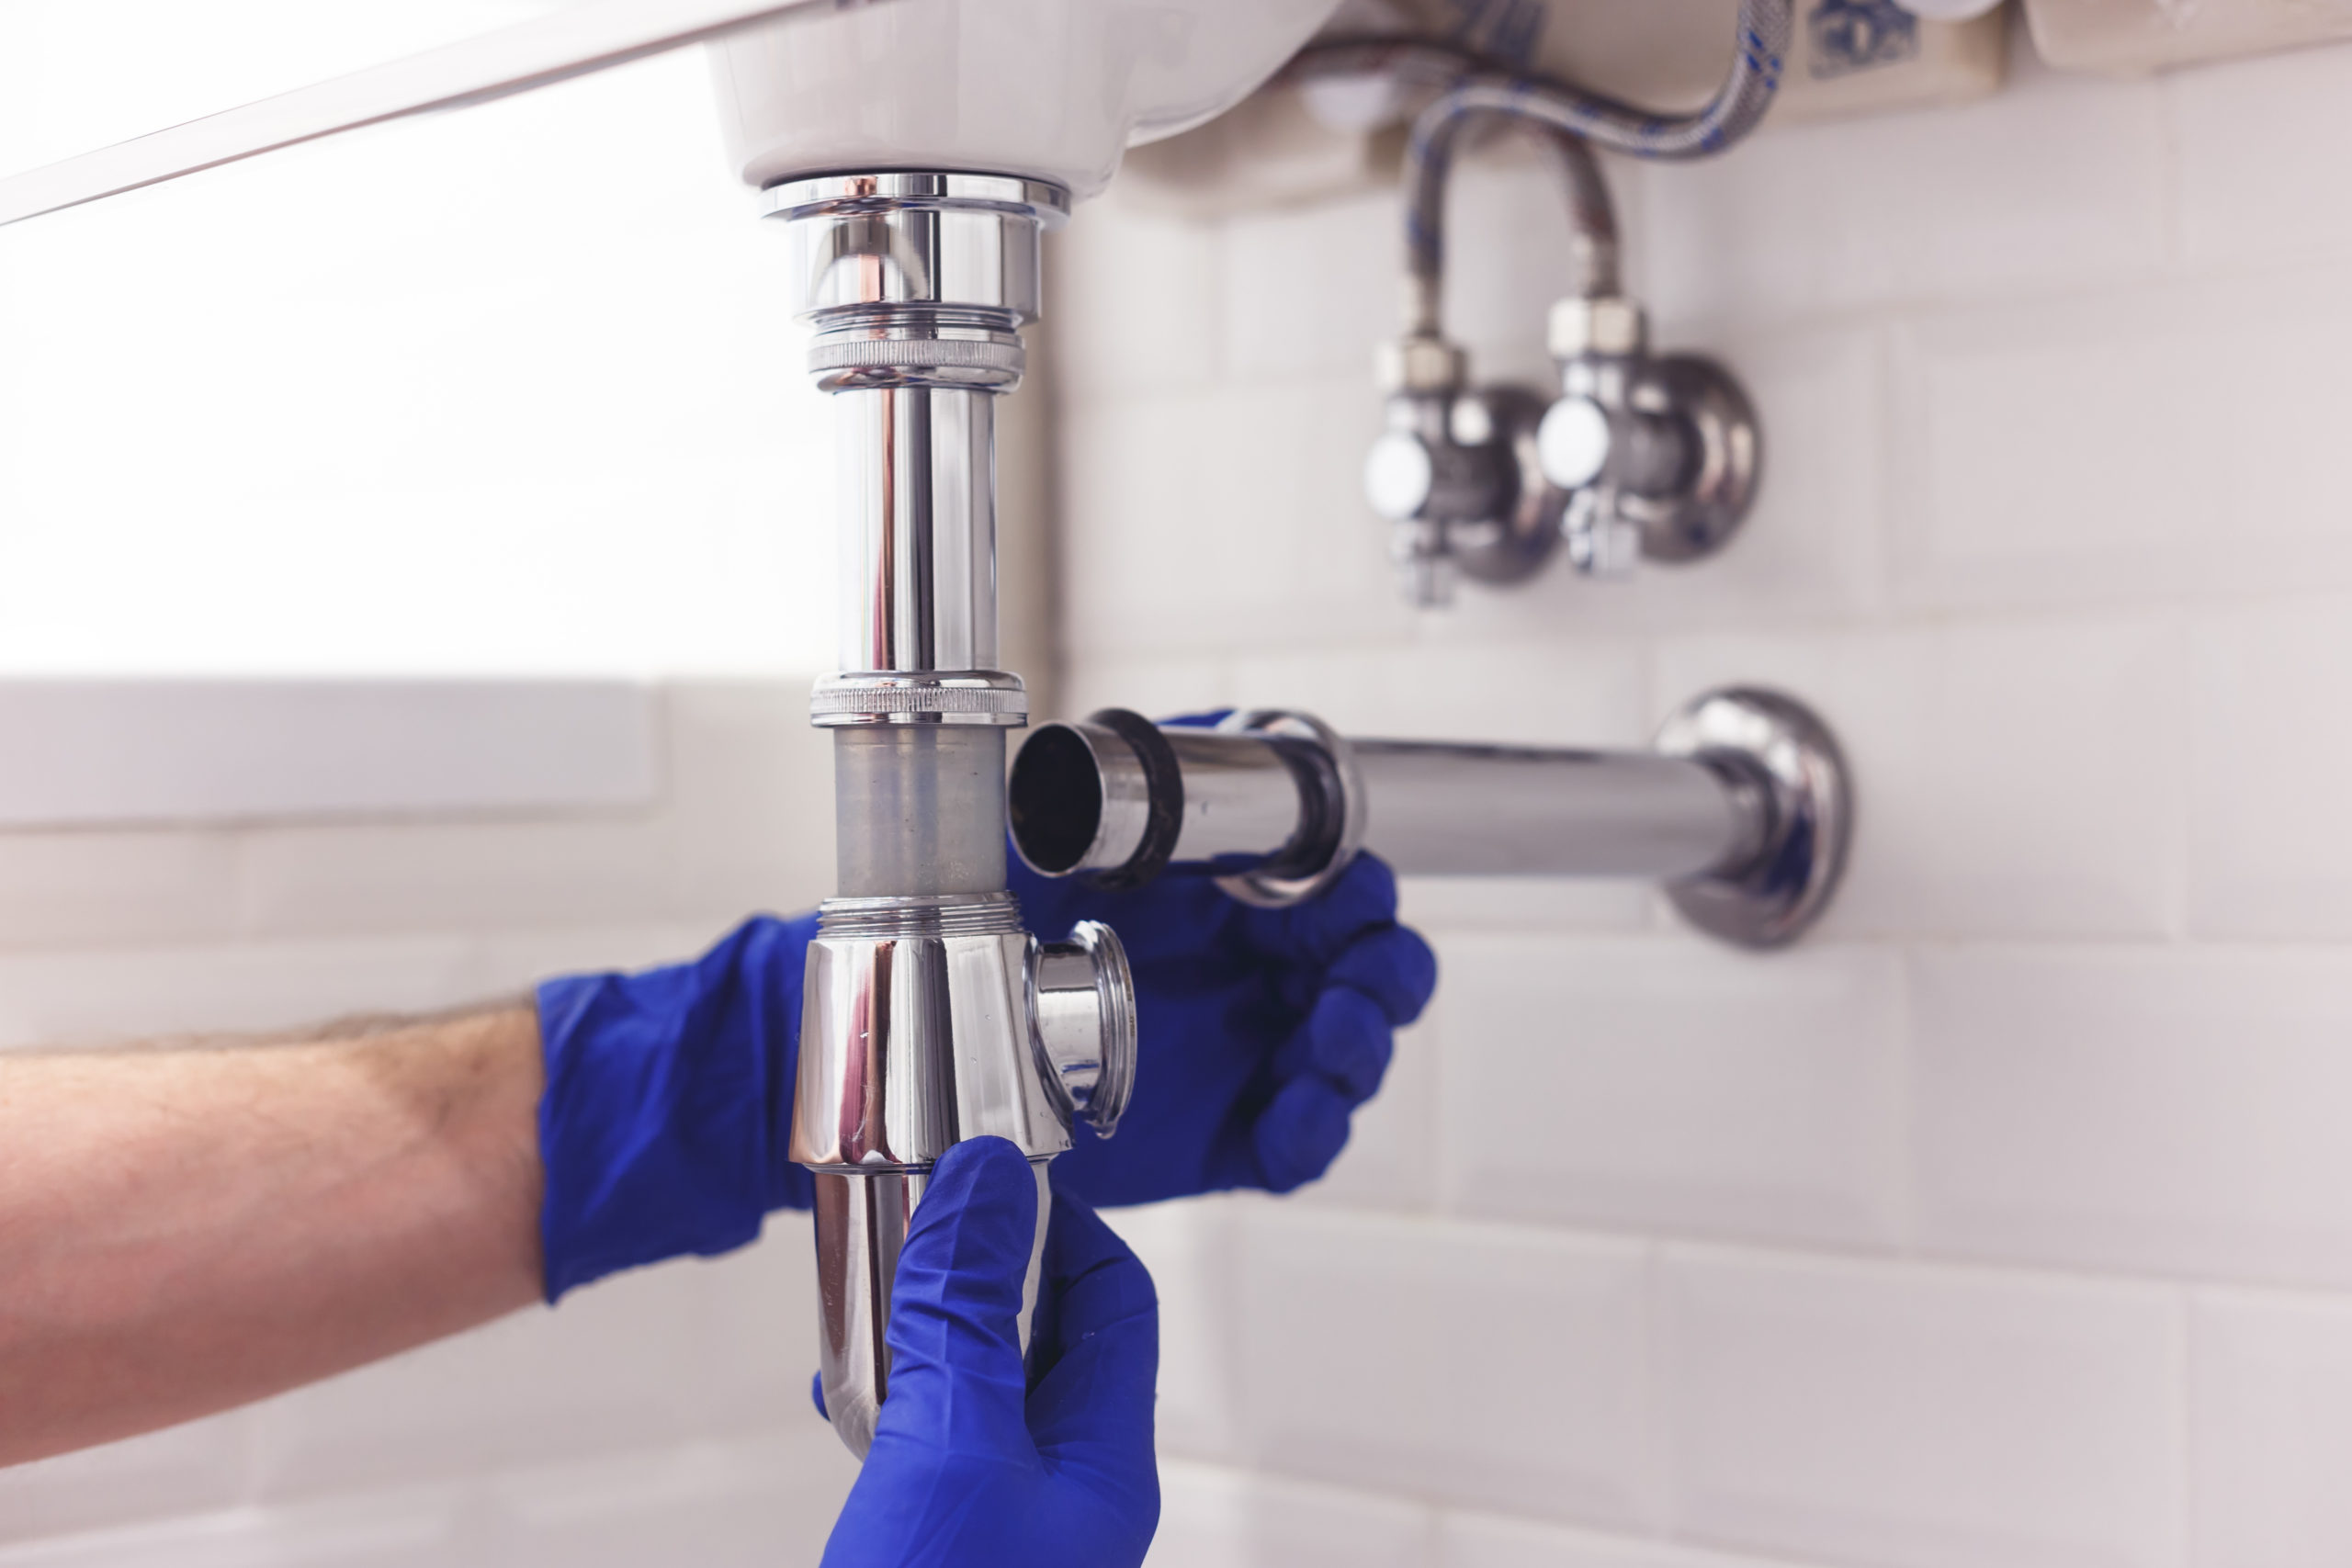 drain cleaning, clogged drain, plumbing services